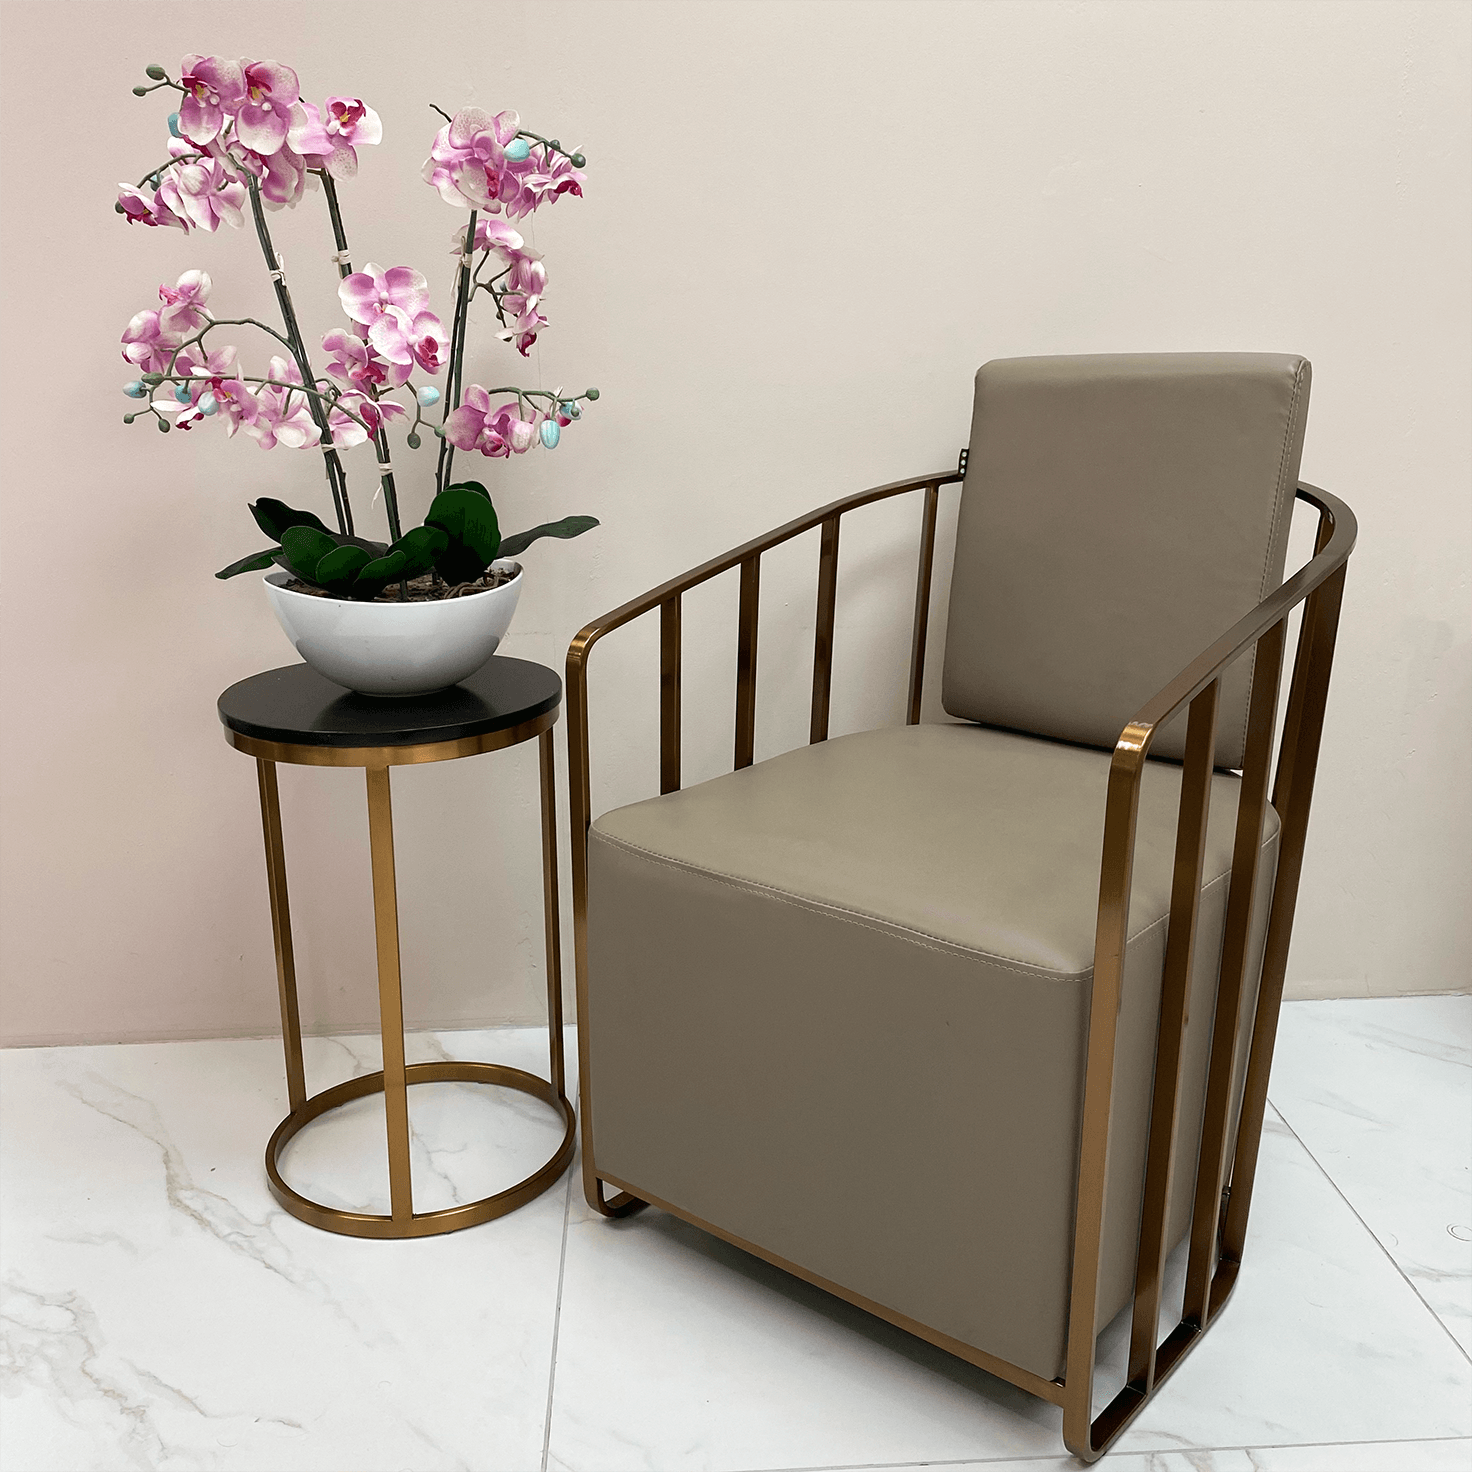 The Willow Salon Waiting Seat - Copper & Mushroom by SEC